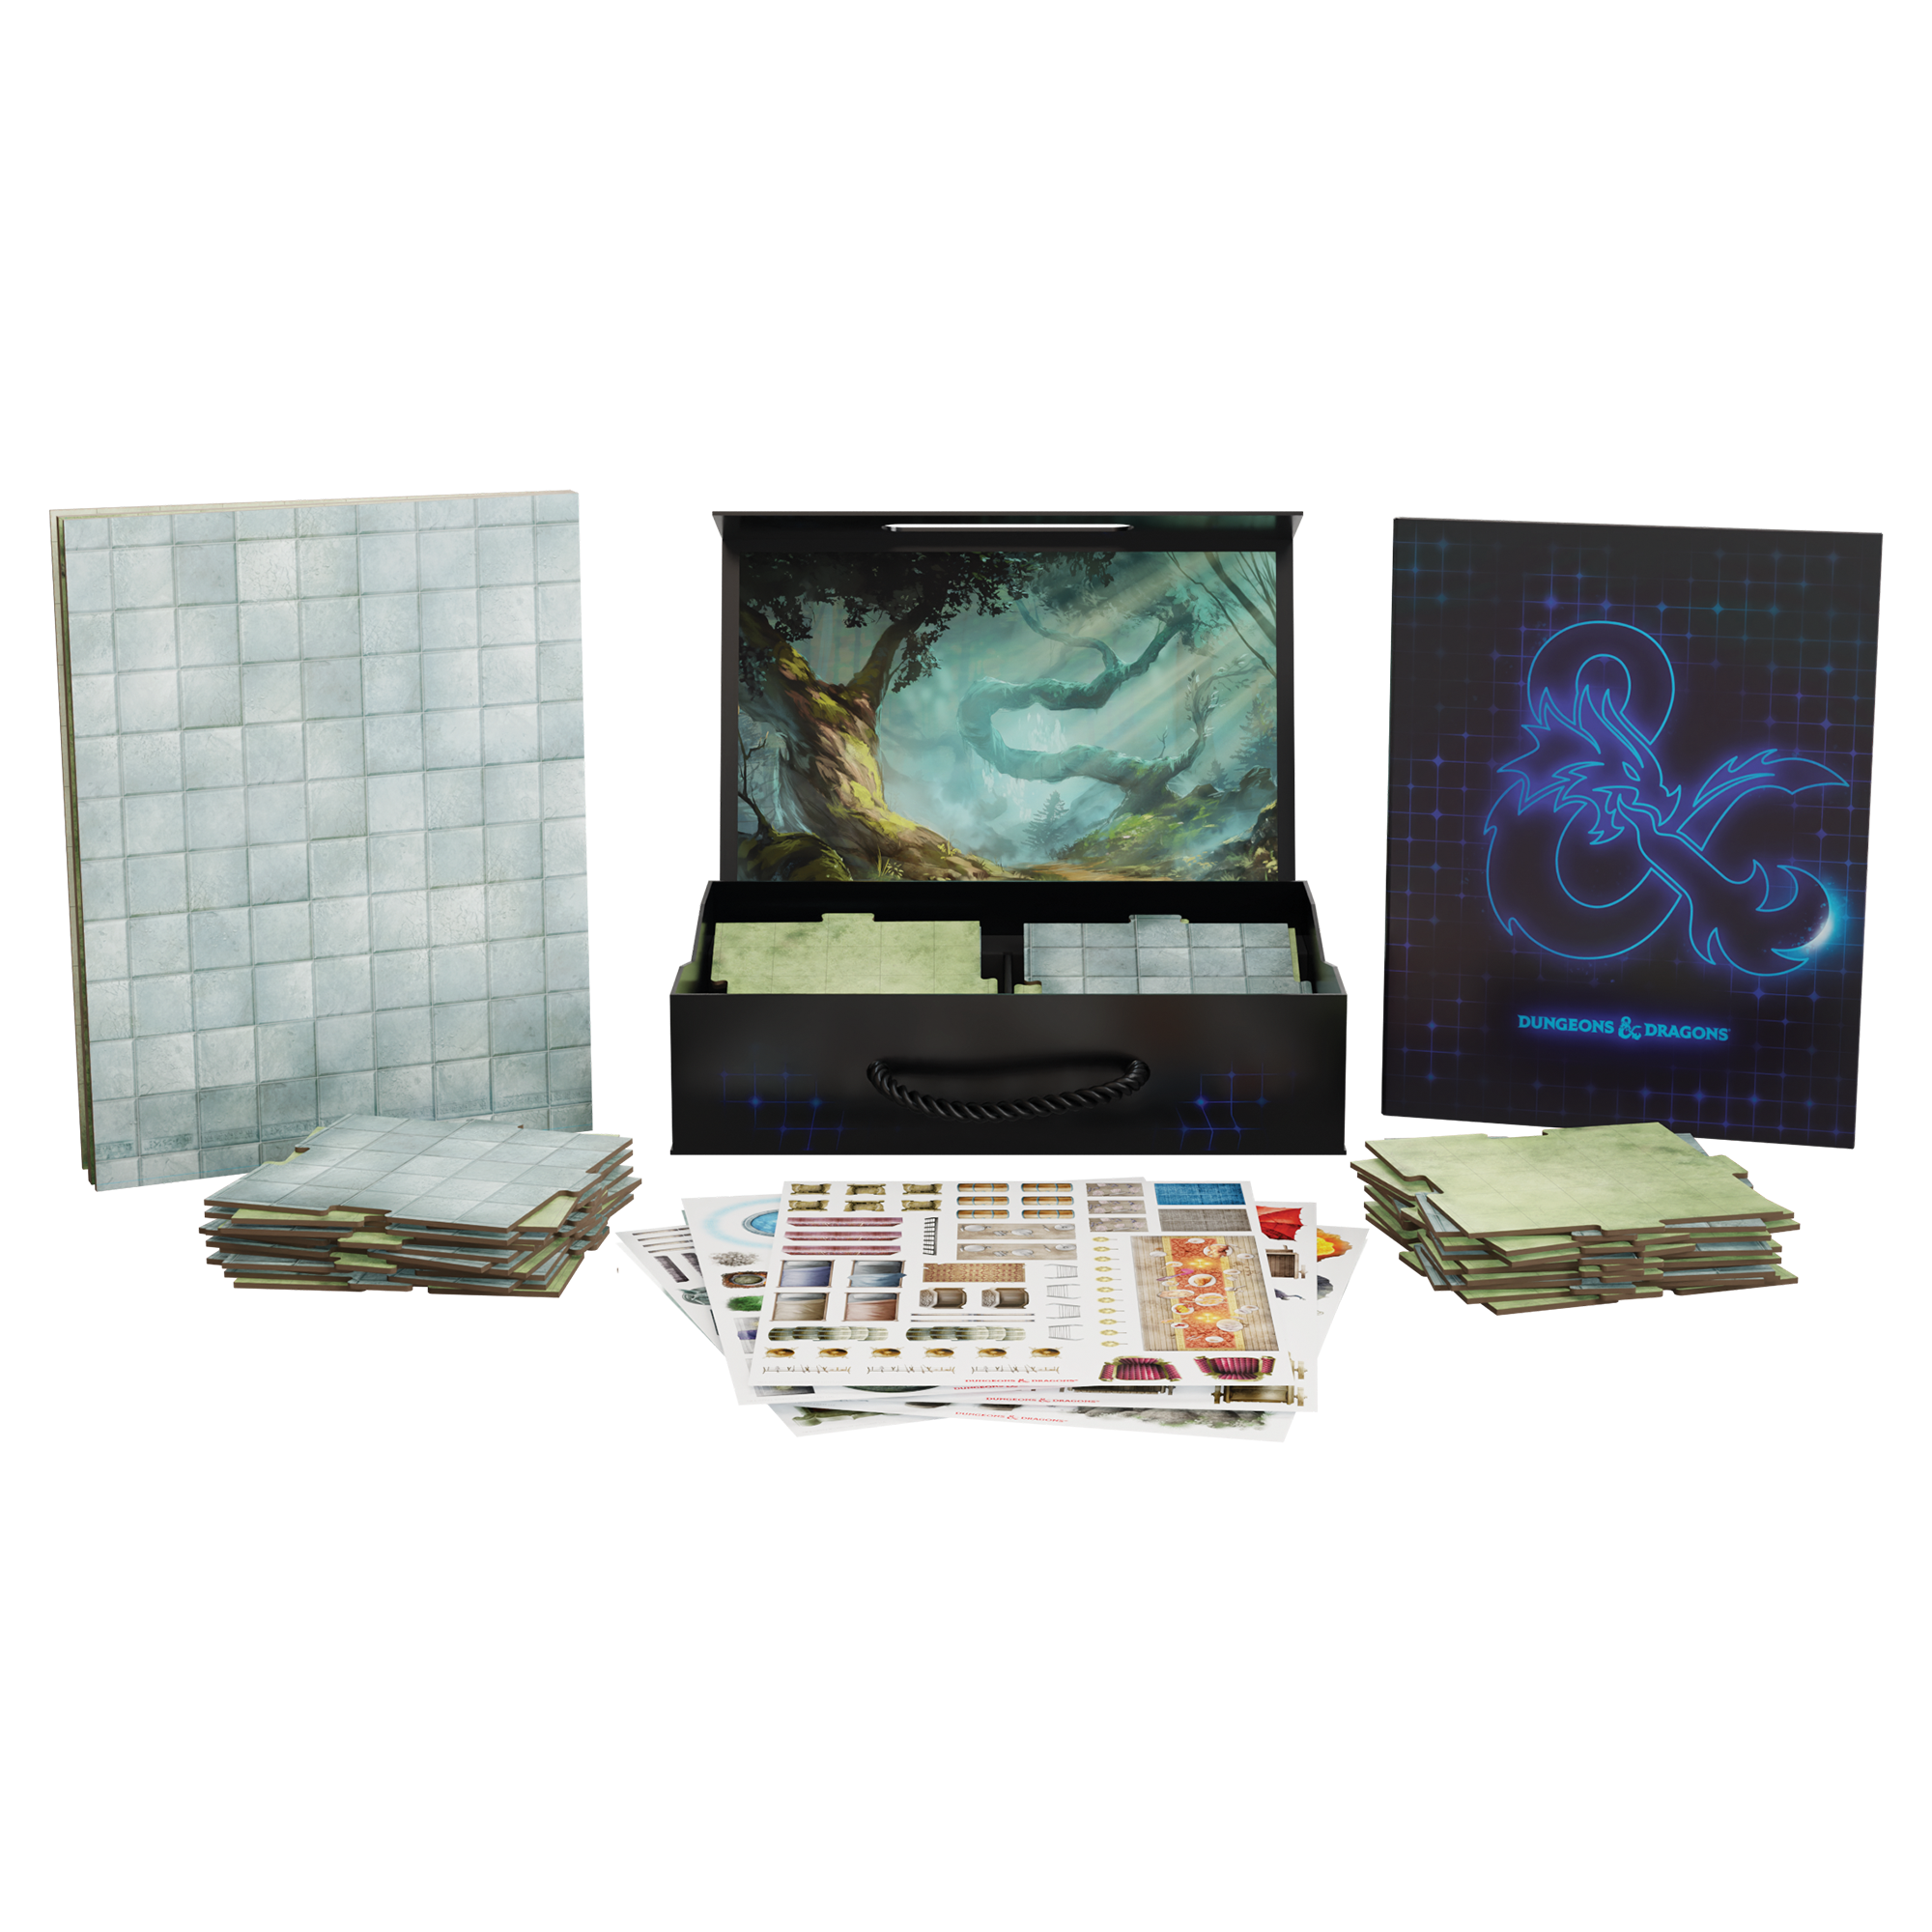 Dungeons & Dragons: Campaign Case - Terrain (Dungeons & Dragons Accessories)